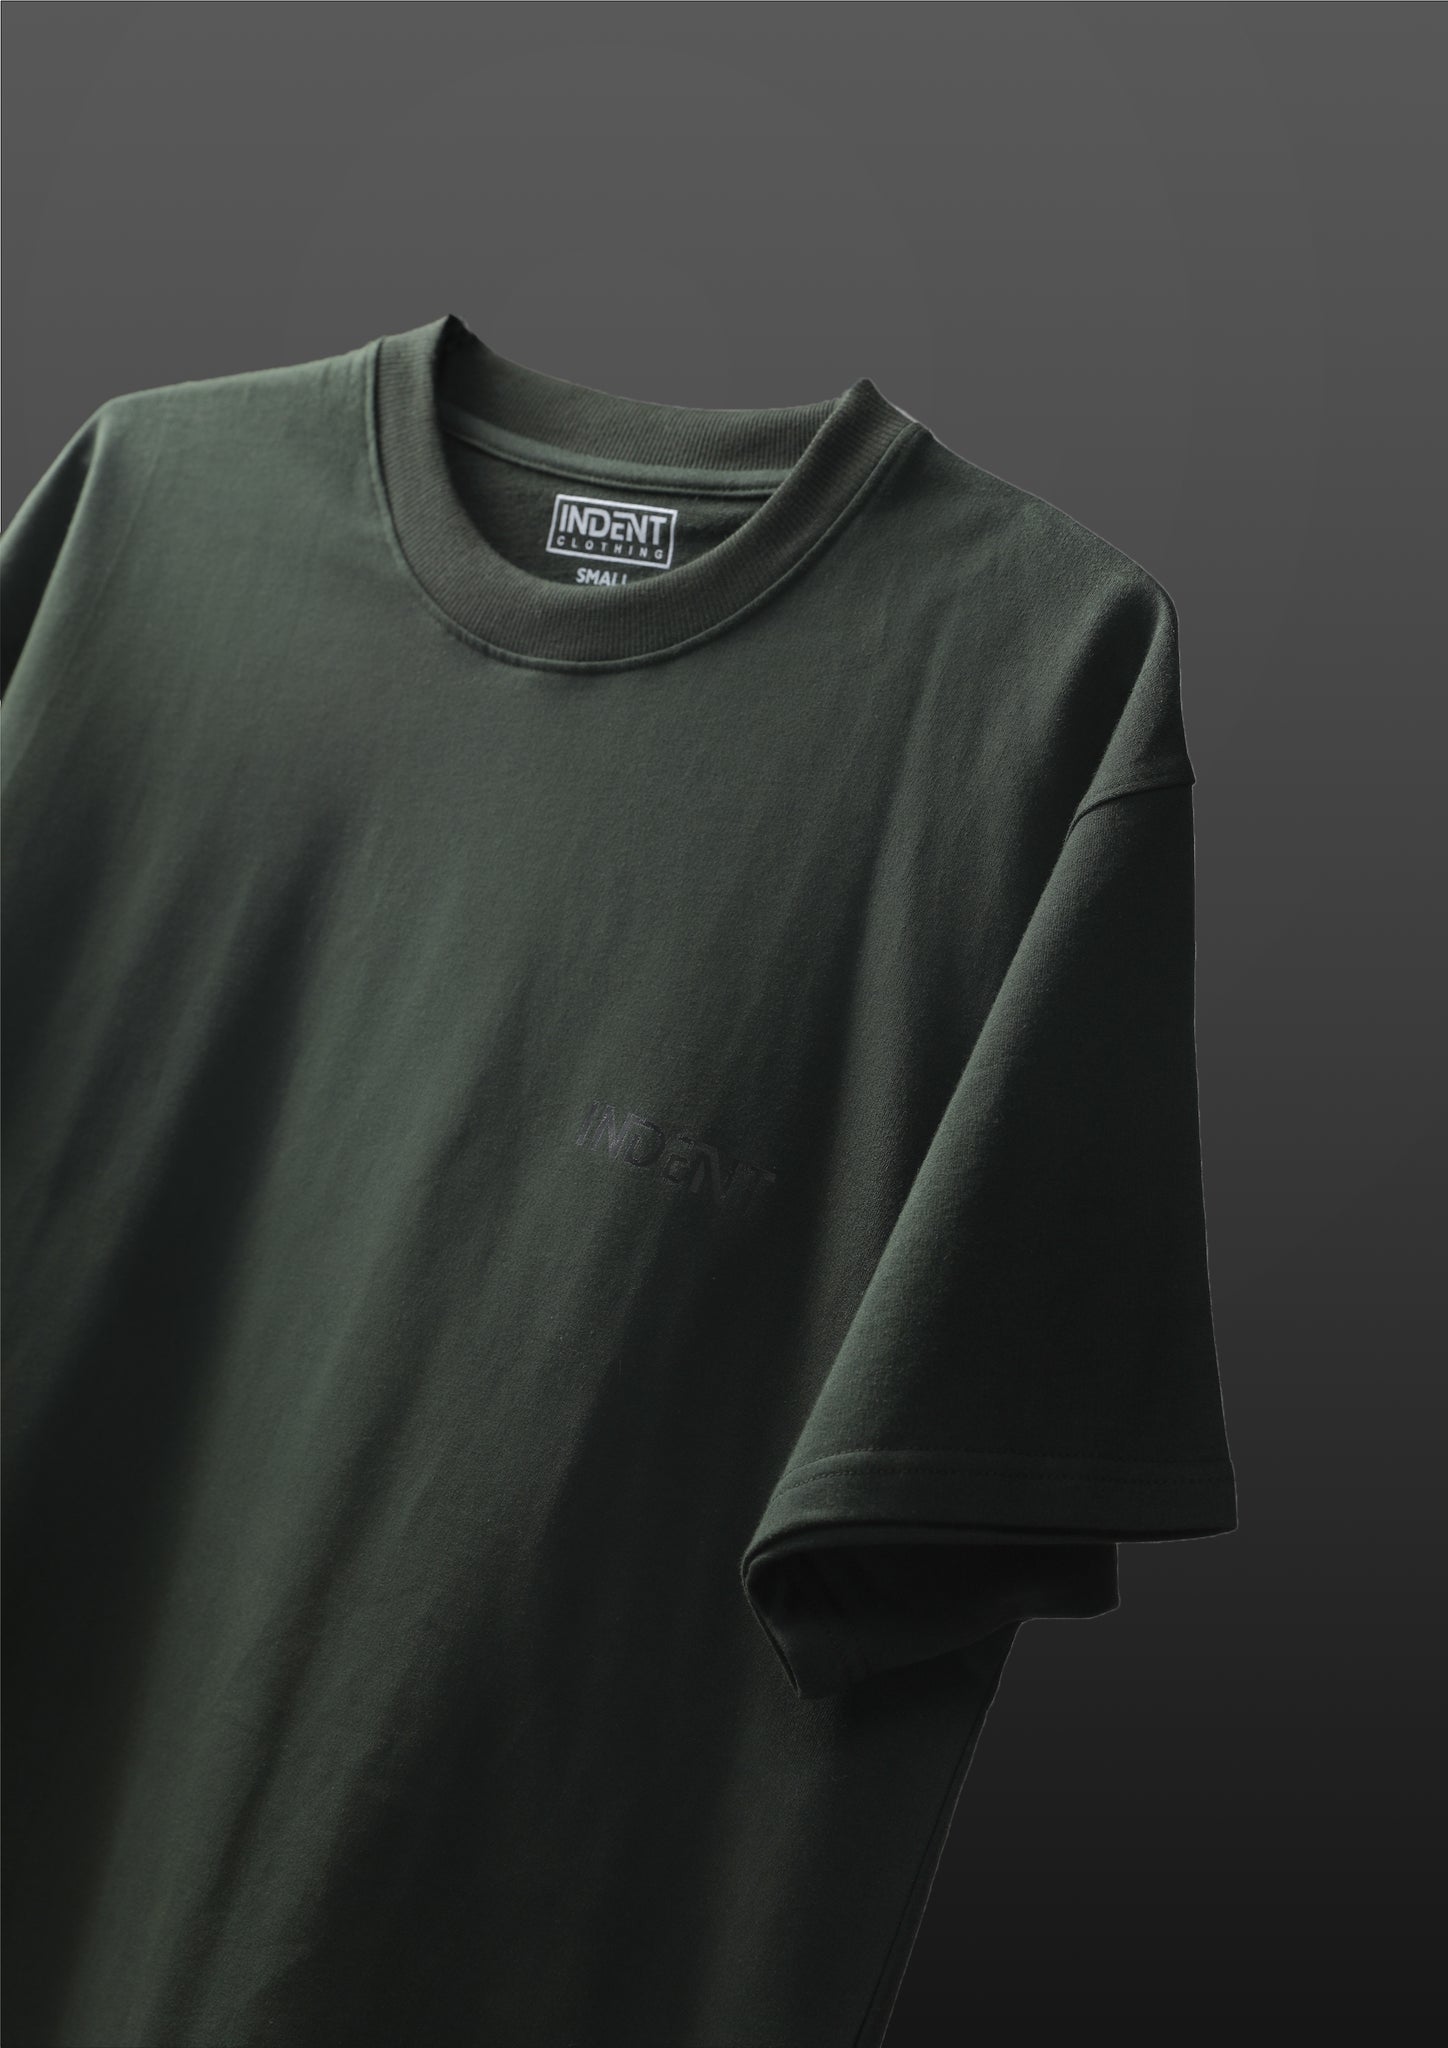 "INDENT" - Military Green